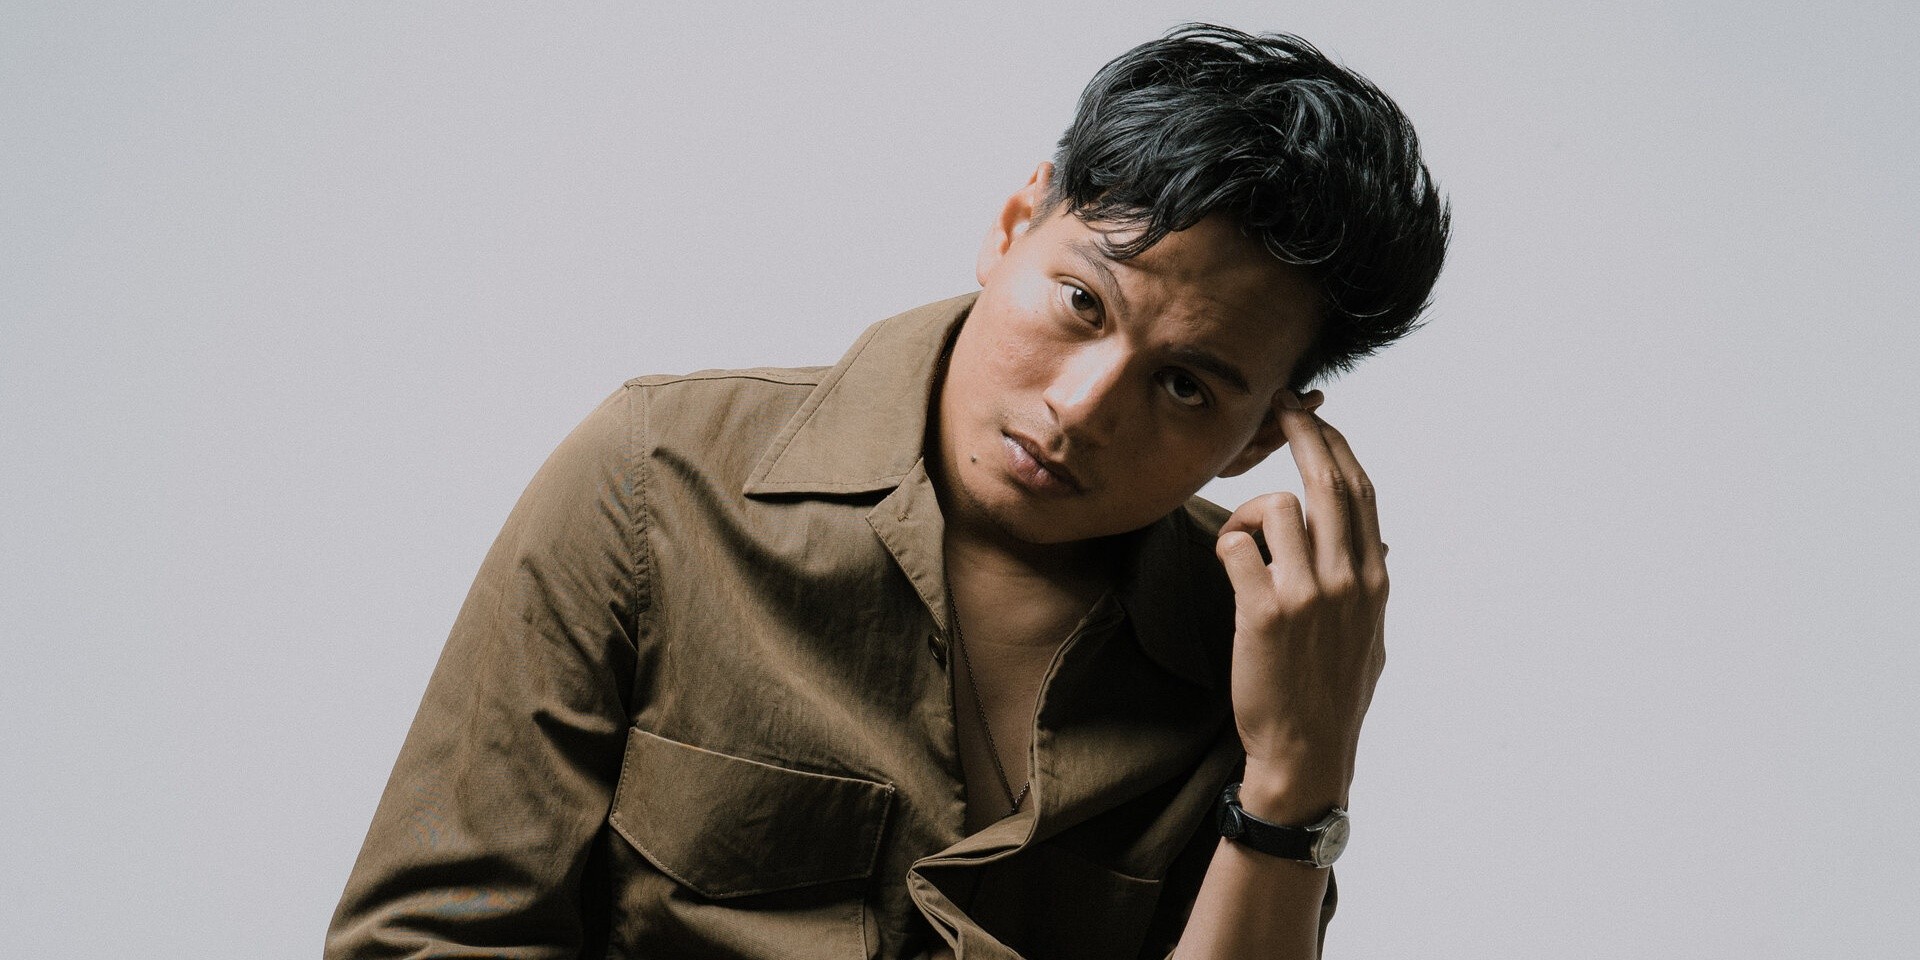 Asia Spotlight: Rendy Pandugo on his artistic evolution, creative process, and the story behind his latest EP 'SEE YOU SOMEDAY'